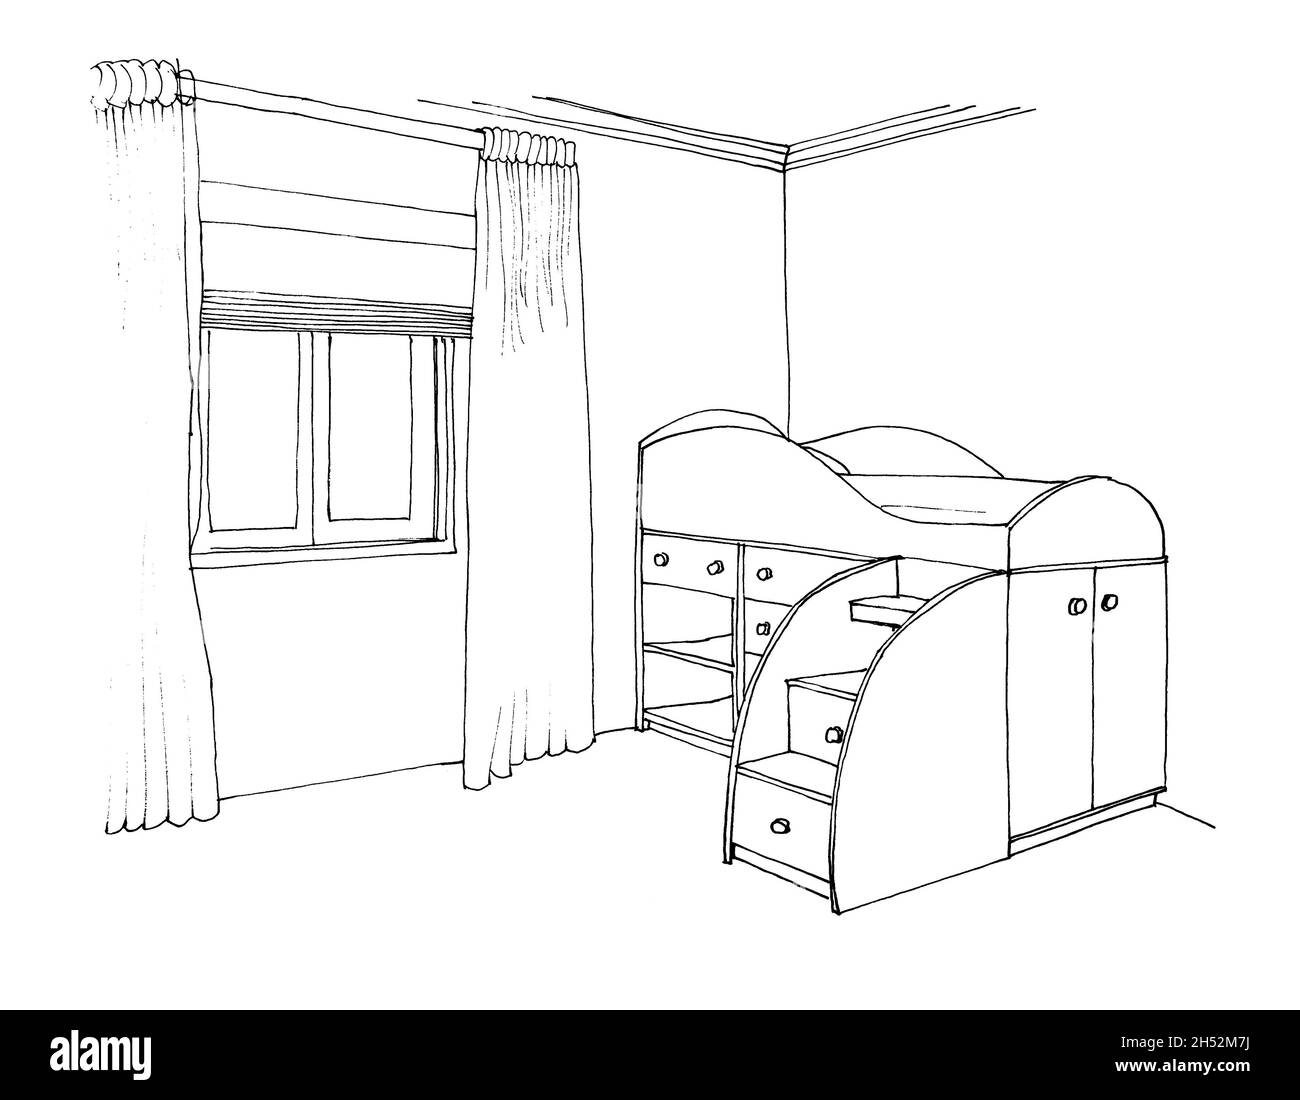 How To Draw A Bunk Bed Easy  Bunk Bed Line Drawings Step By Step  Bunk Bed  Furniture Drawings  YouTube